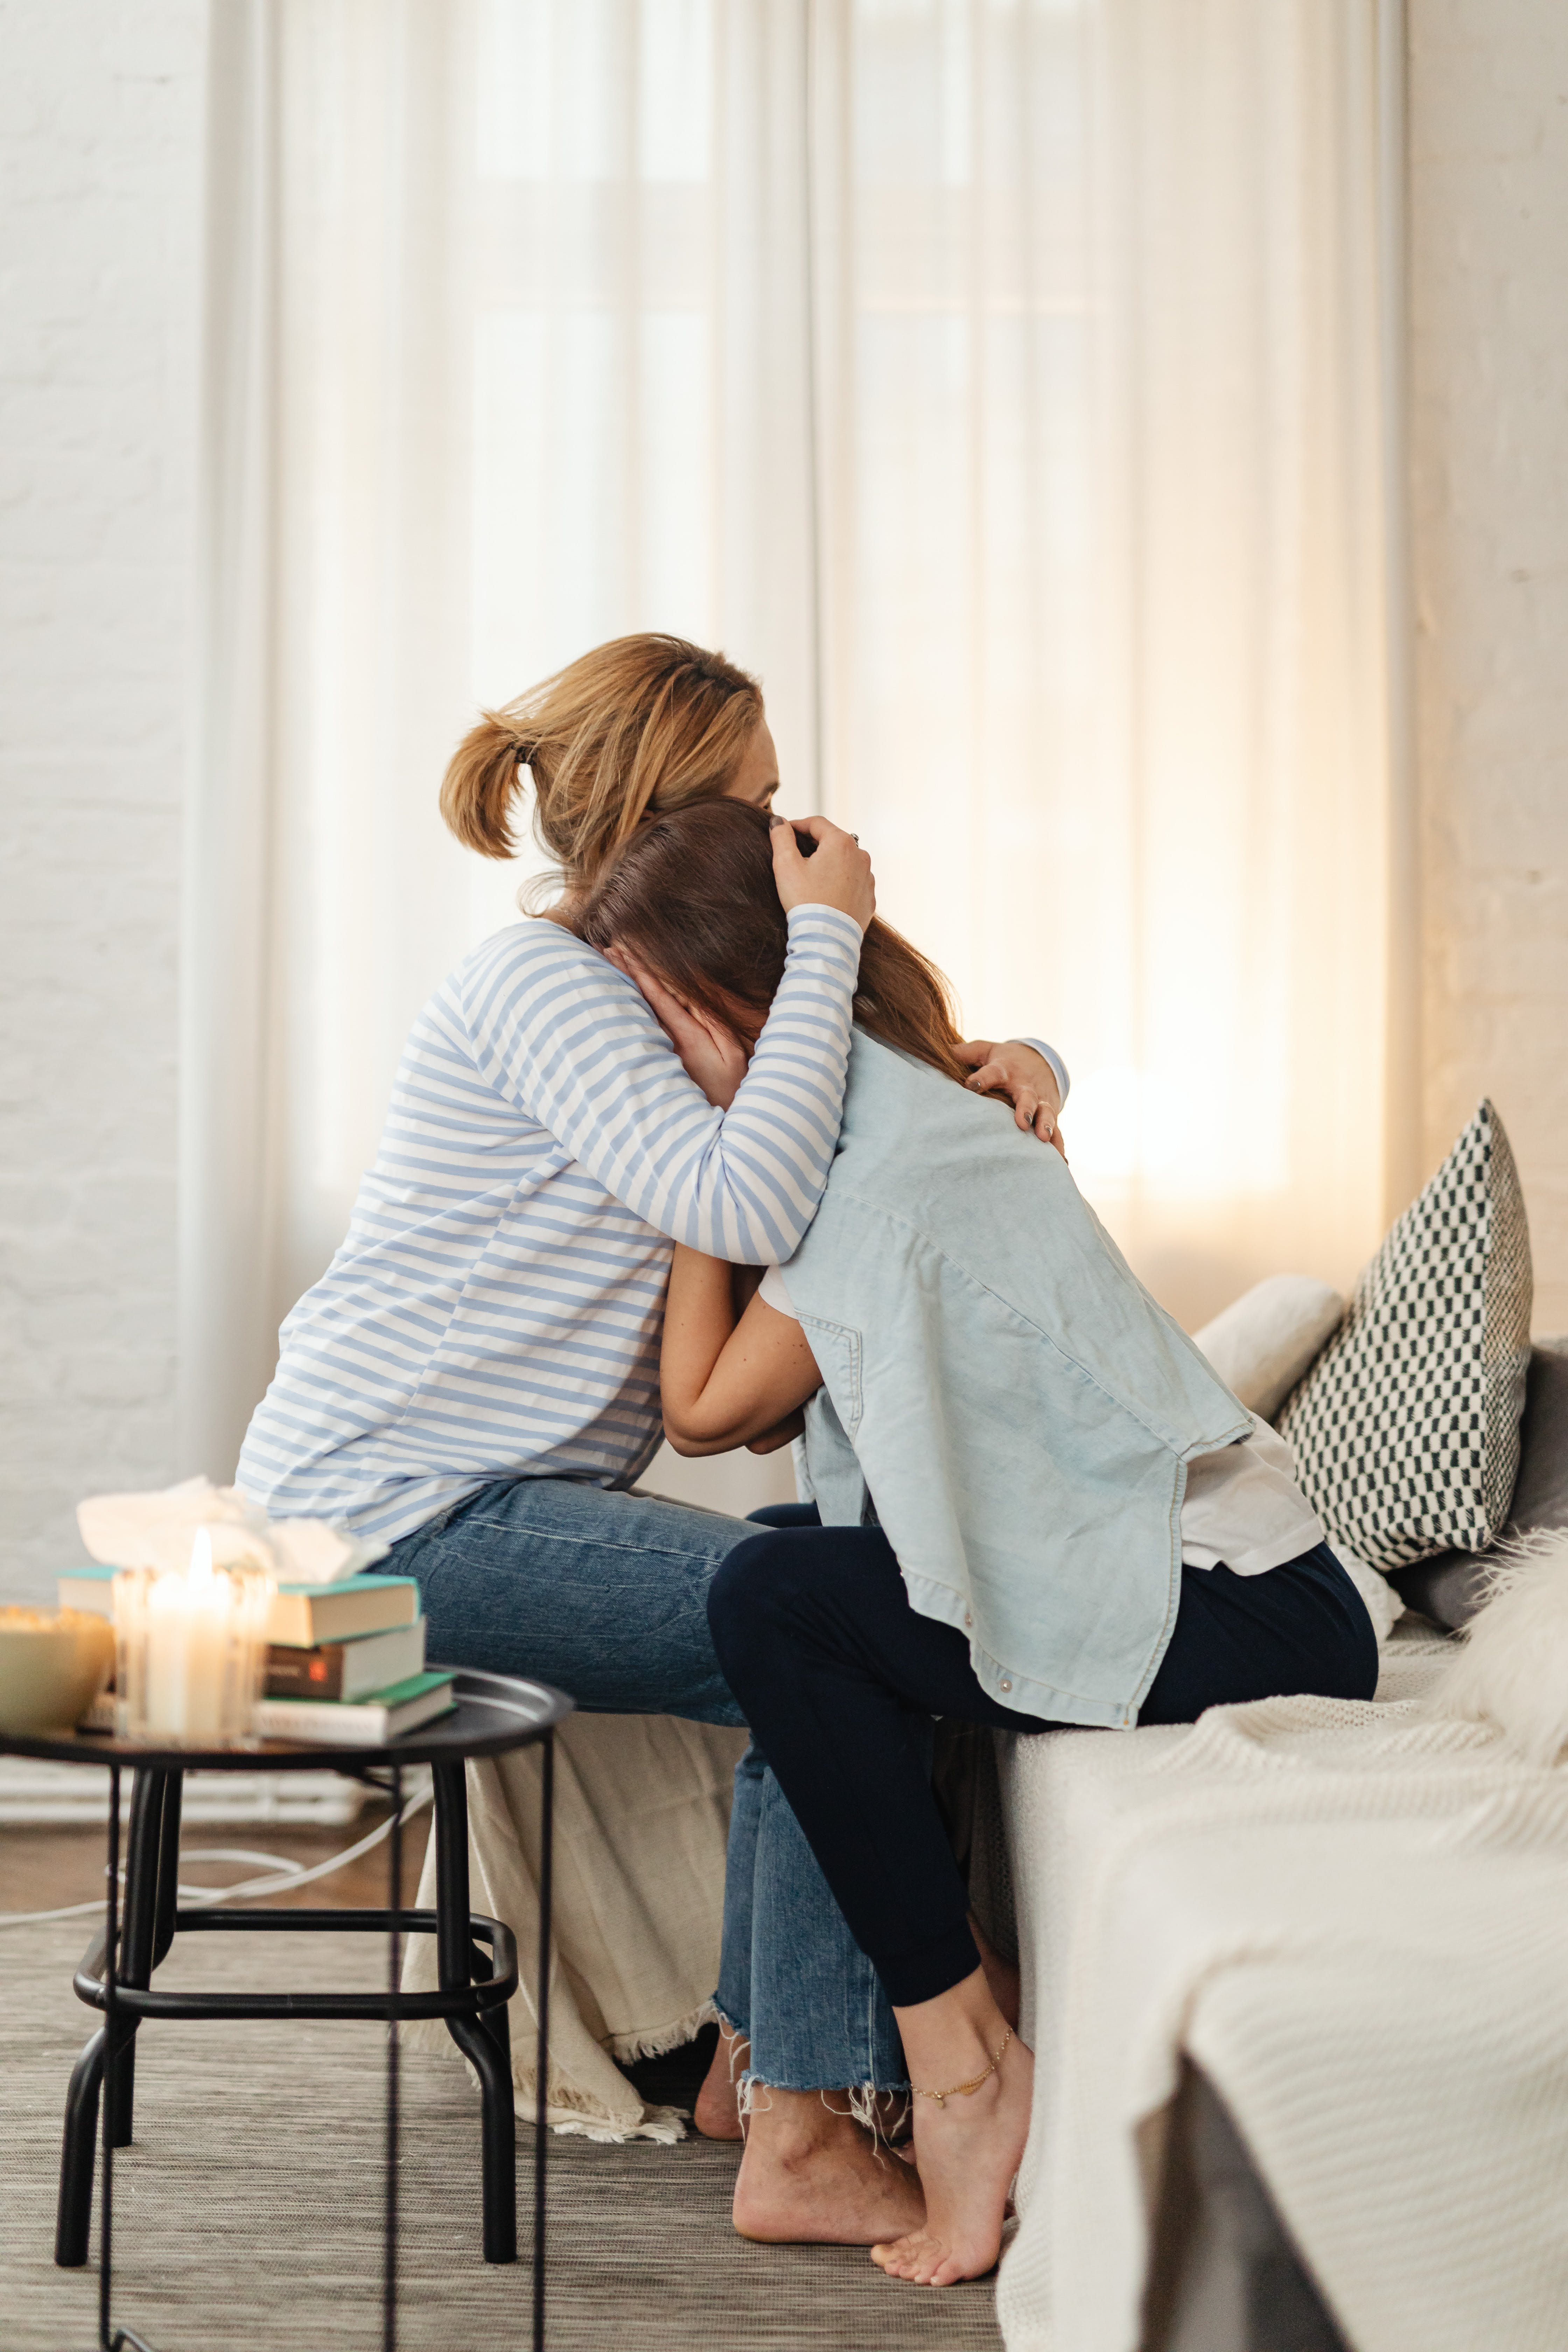 A woman comforting a young woman | Source: Pexels